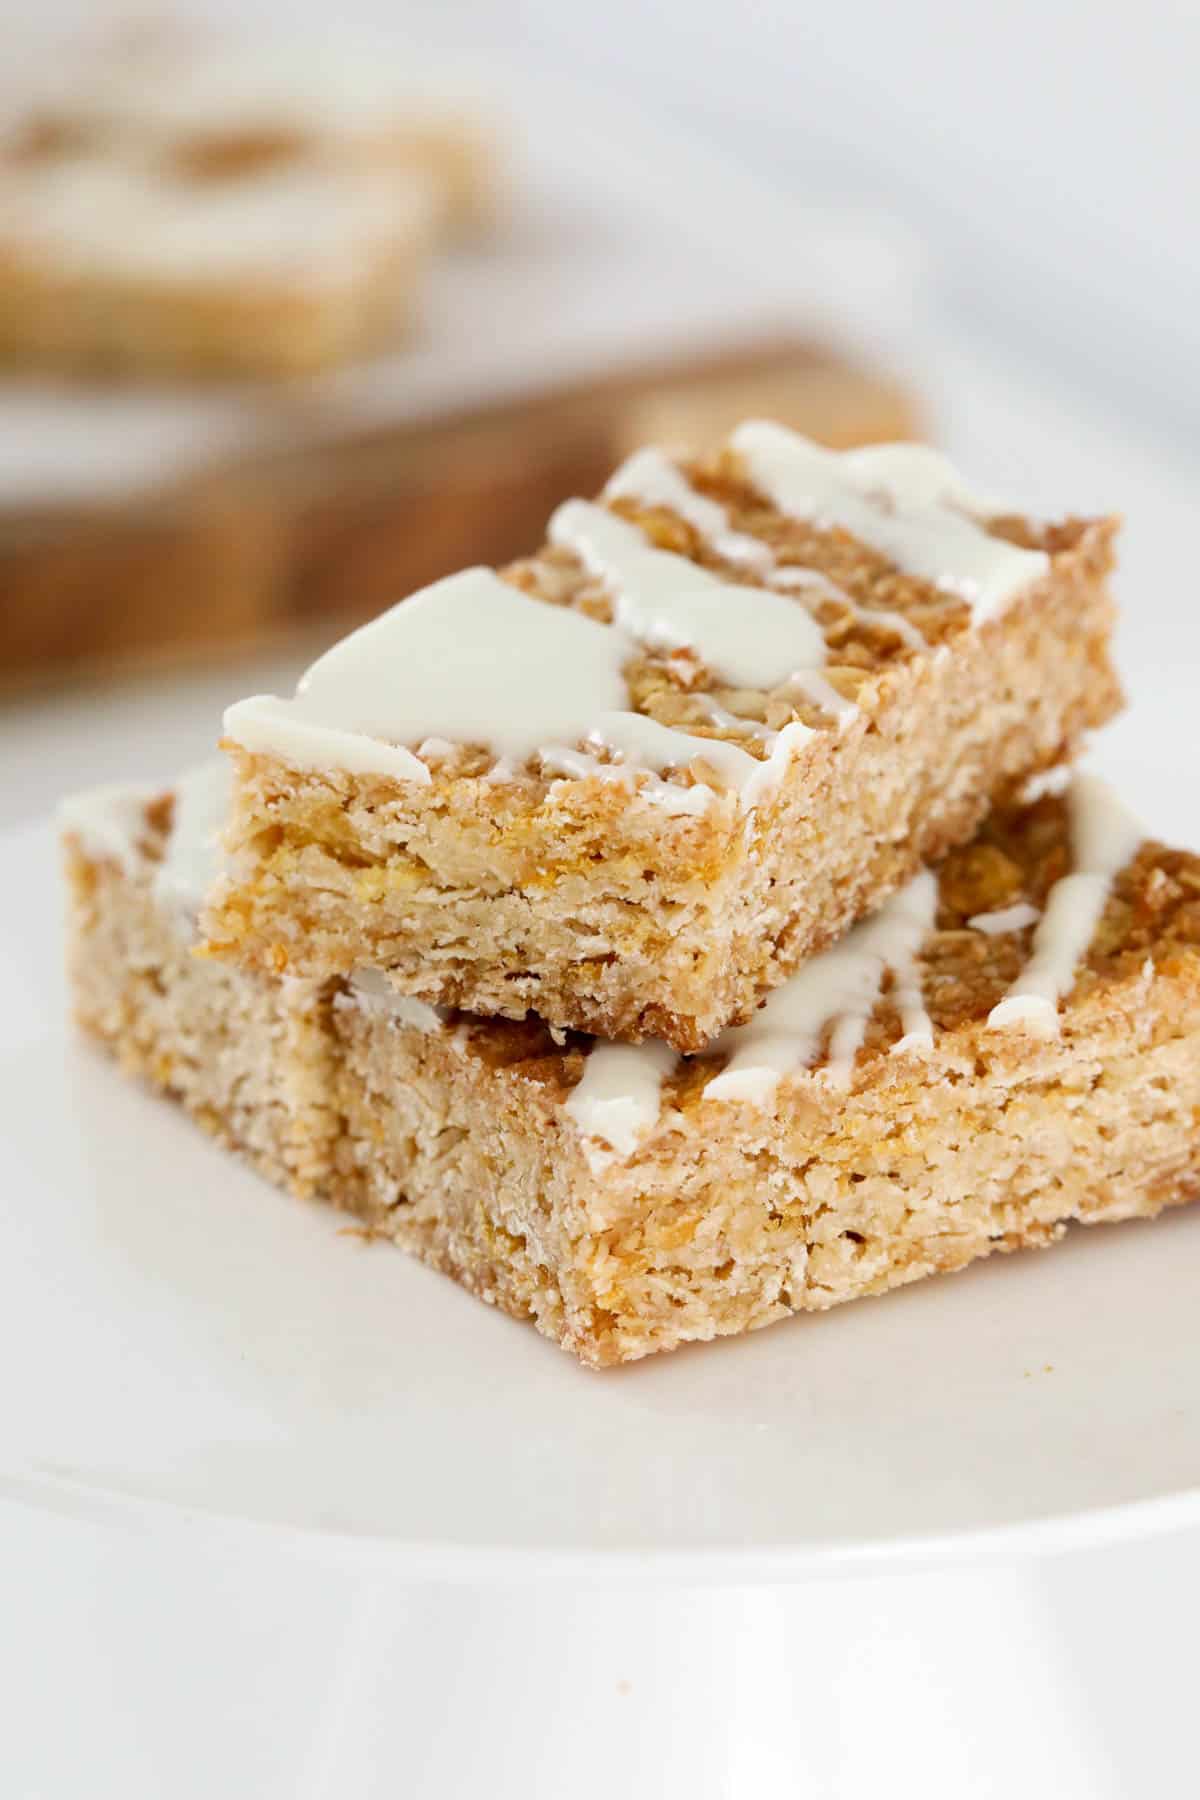 A close up of 3 pieces of cornflakes and oat slice drizzled with white chocolate on top.